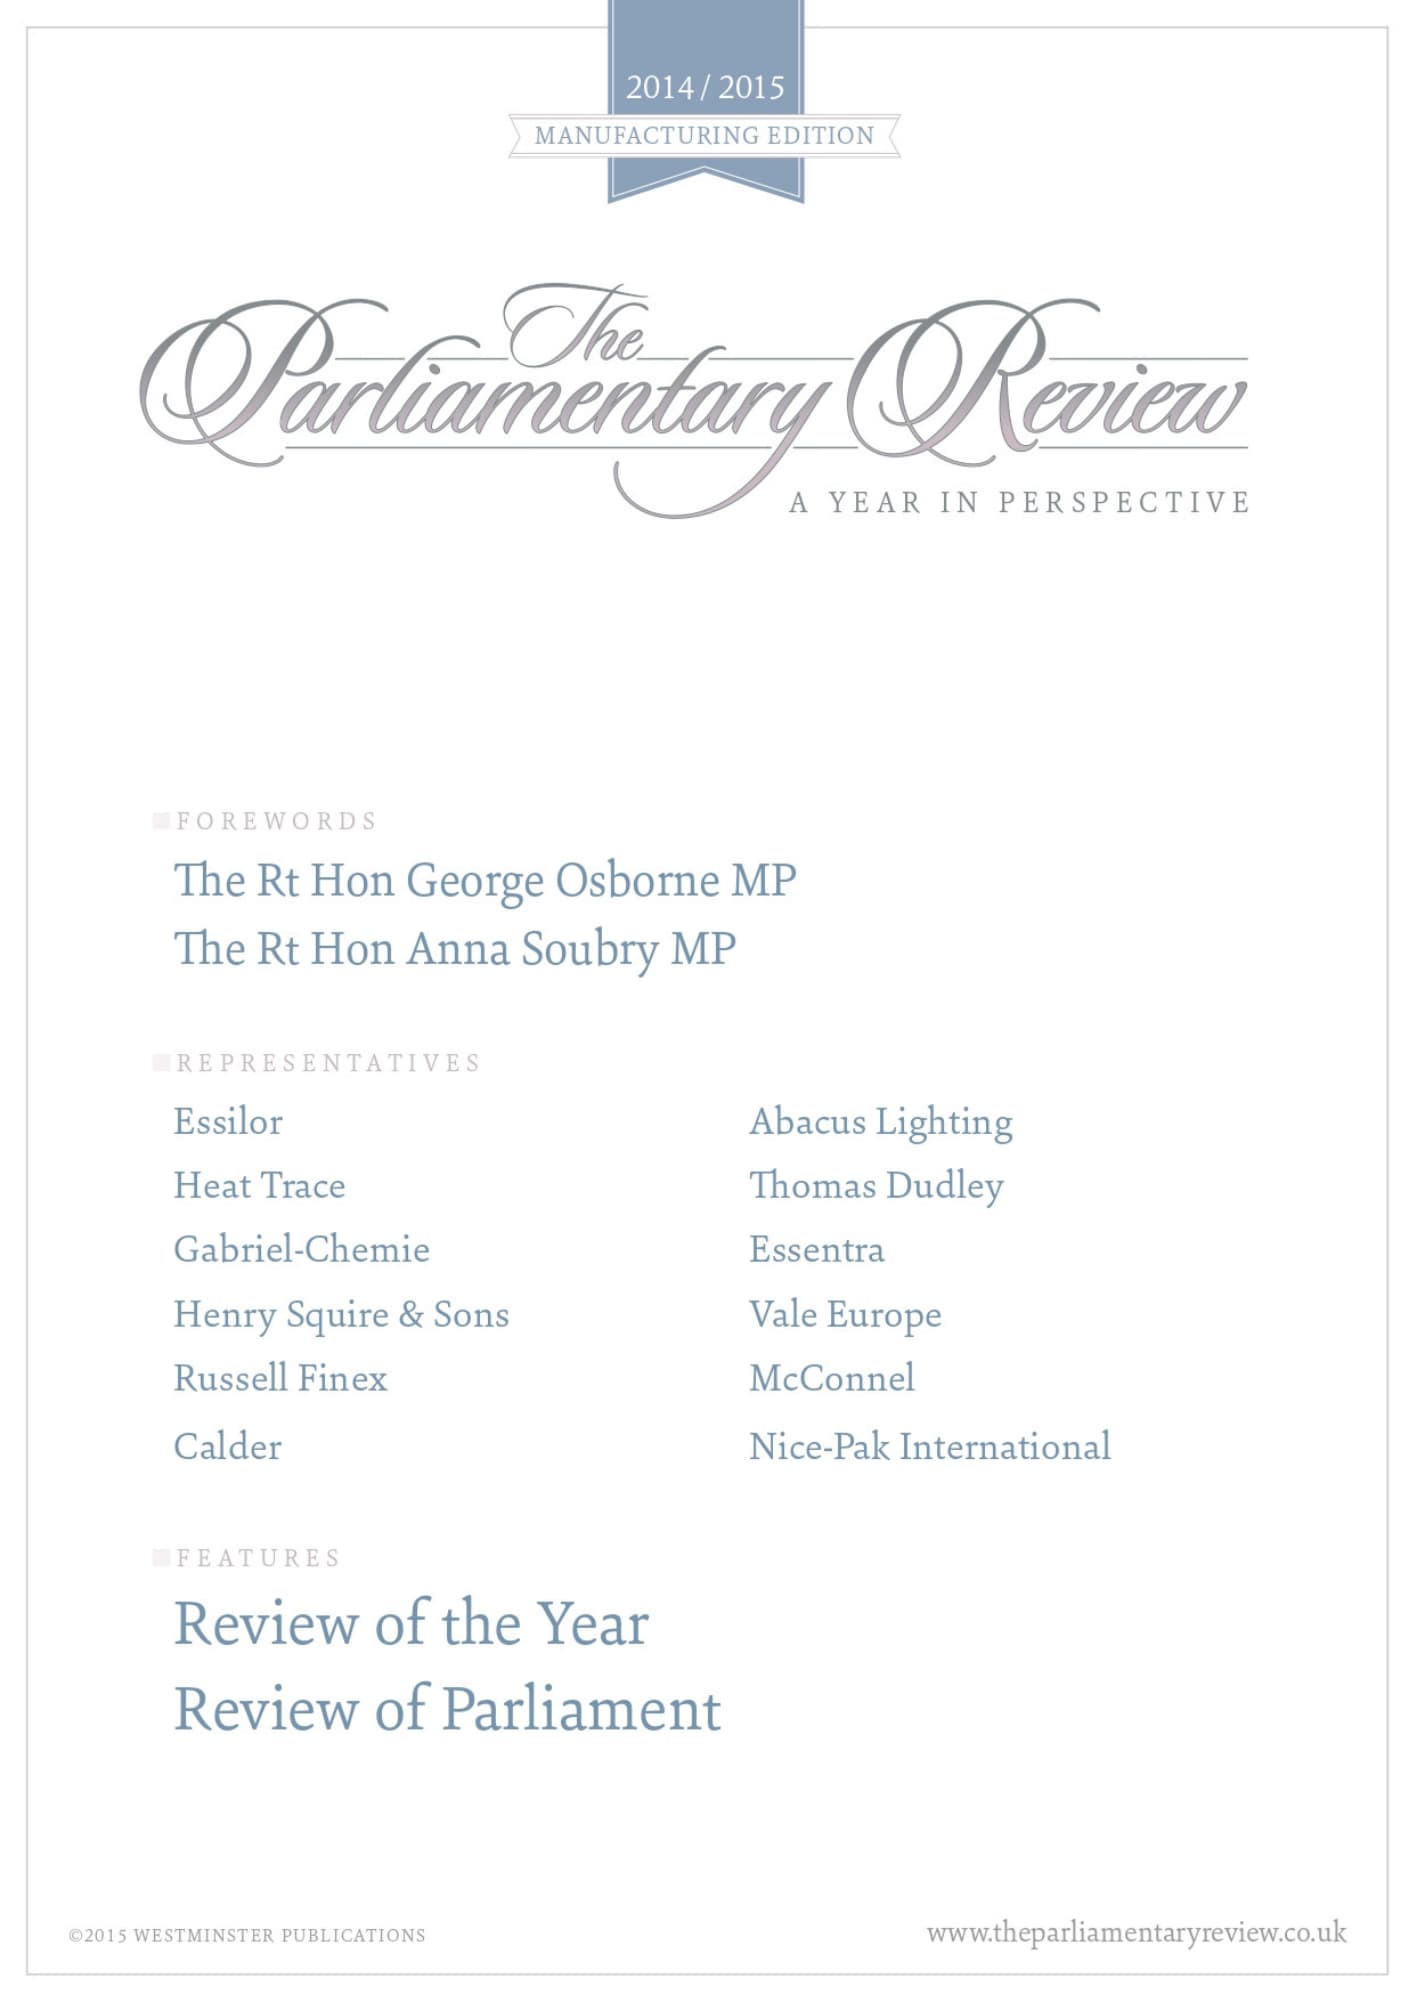 Parliamentary Review - full article